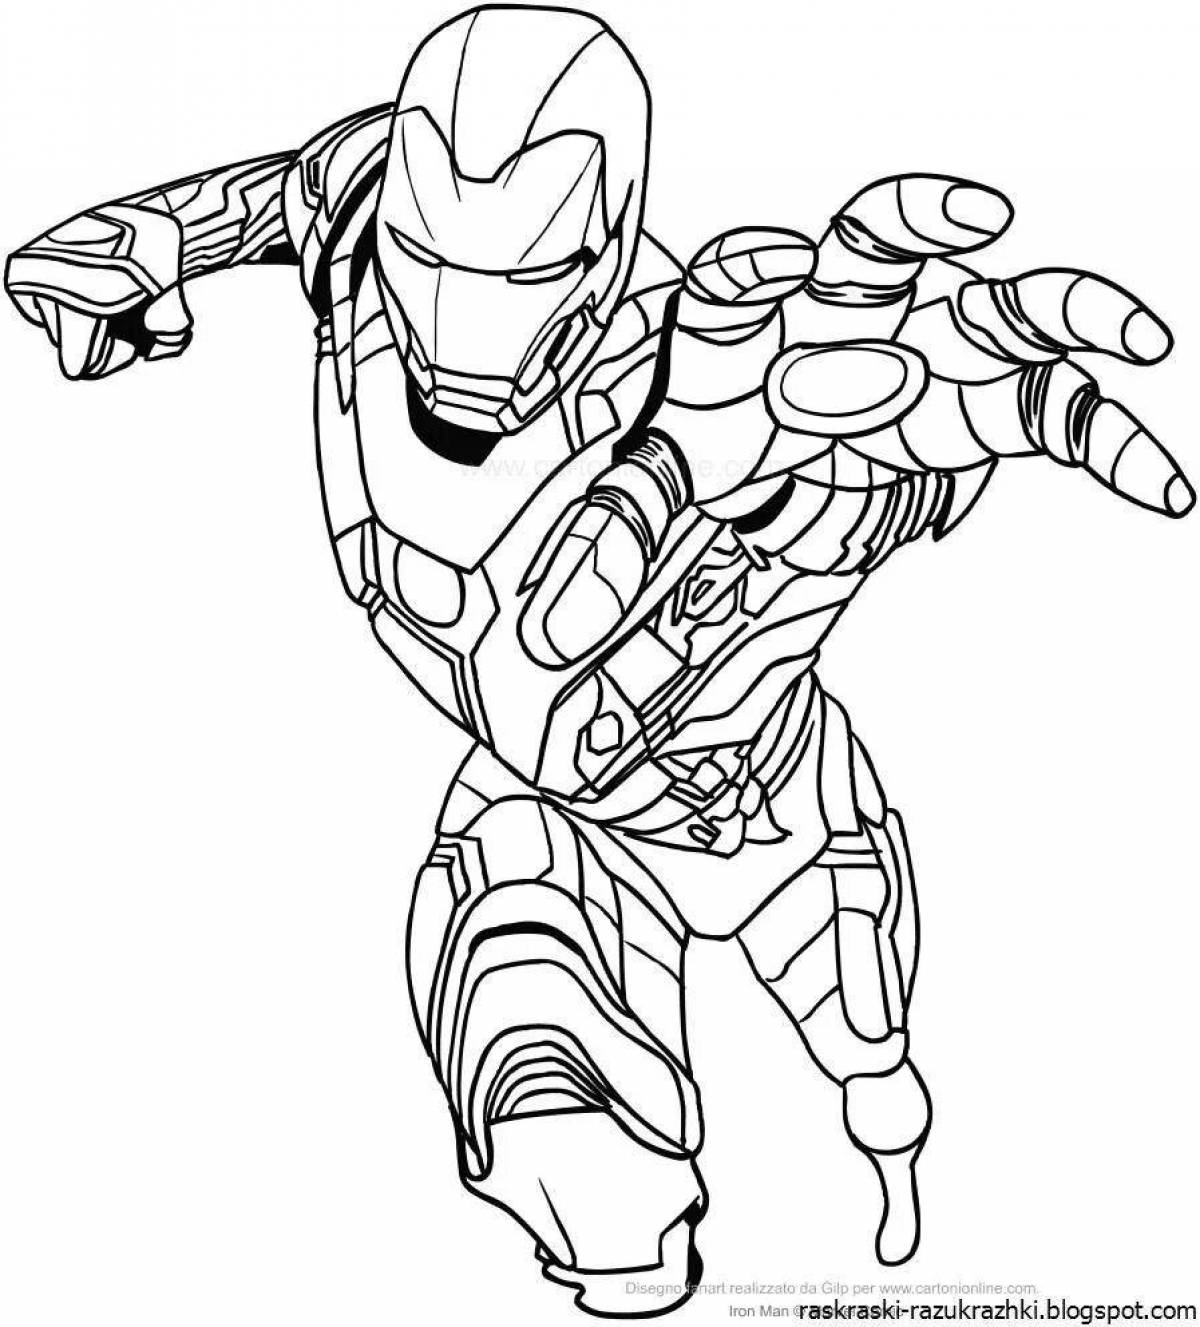 Iron Man colorful coloring book